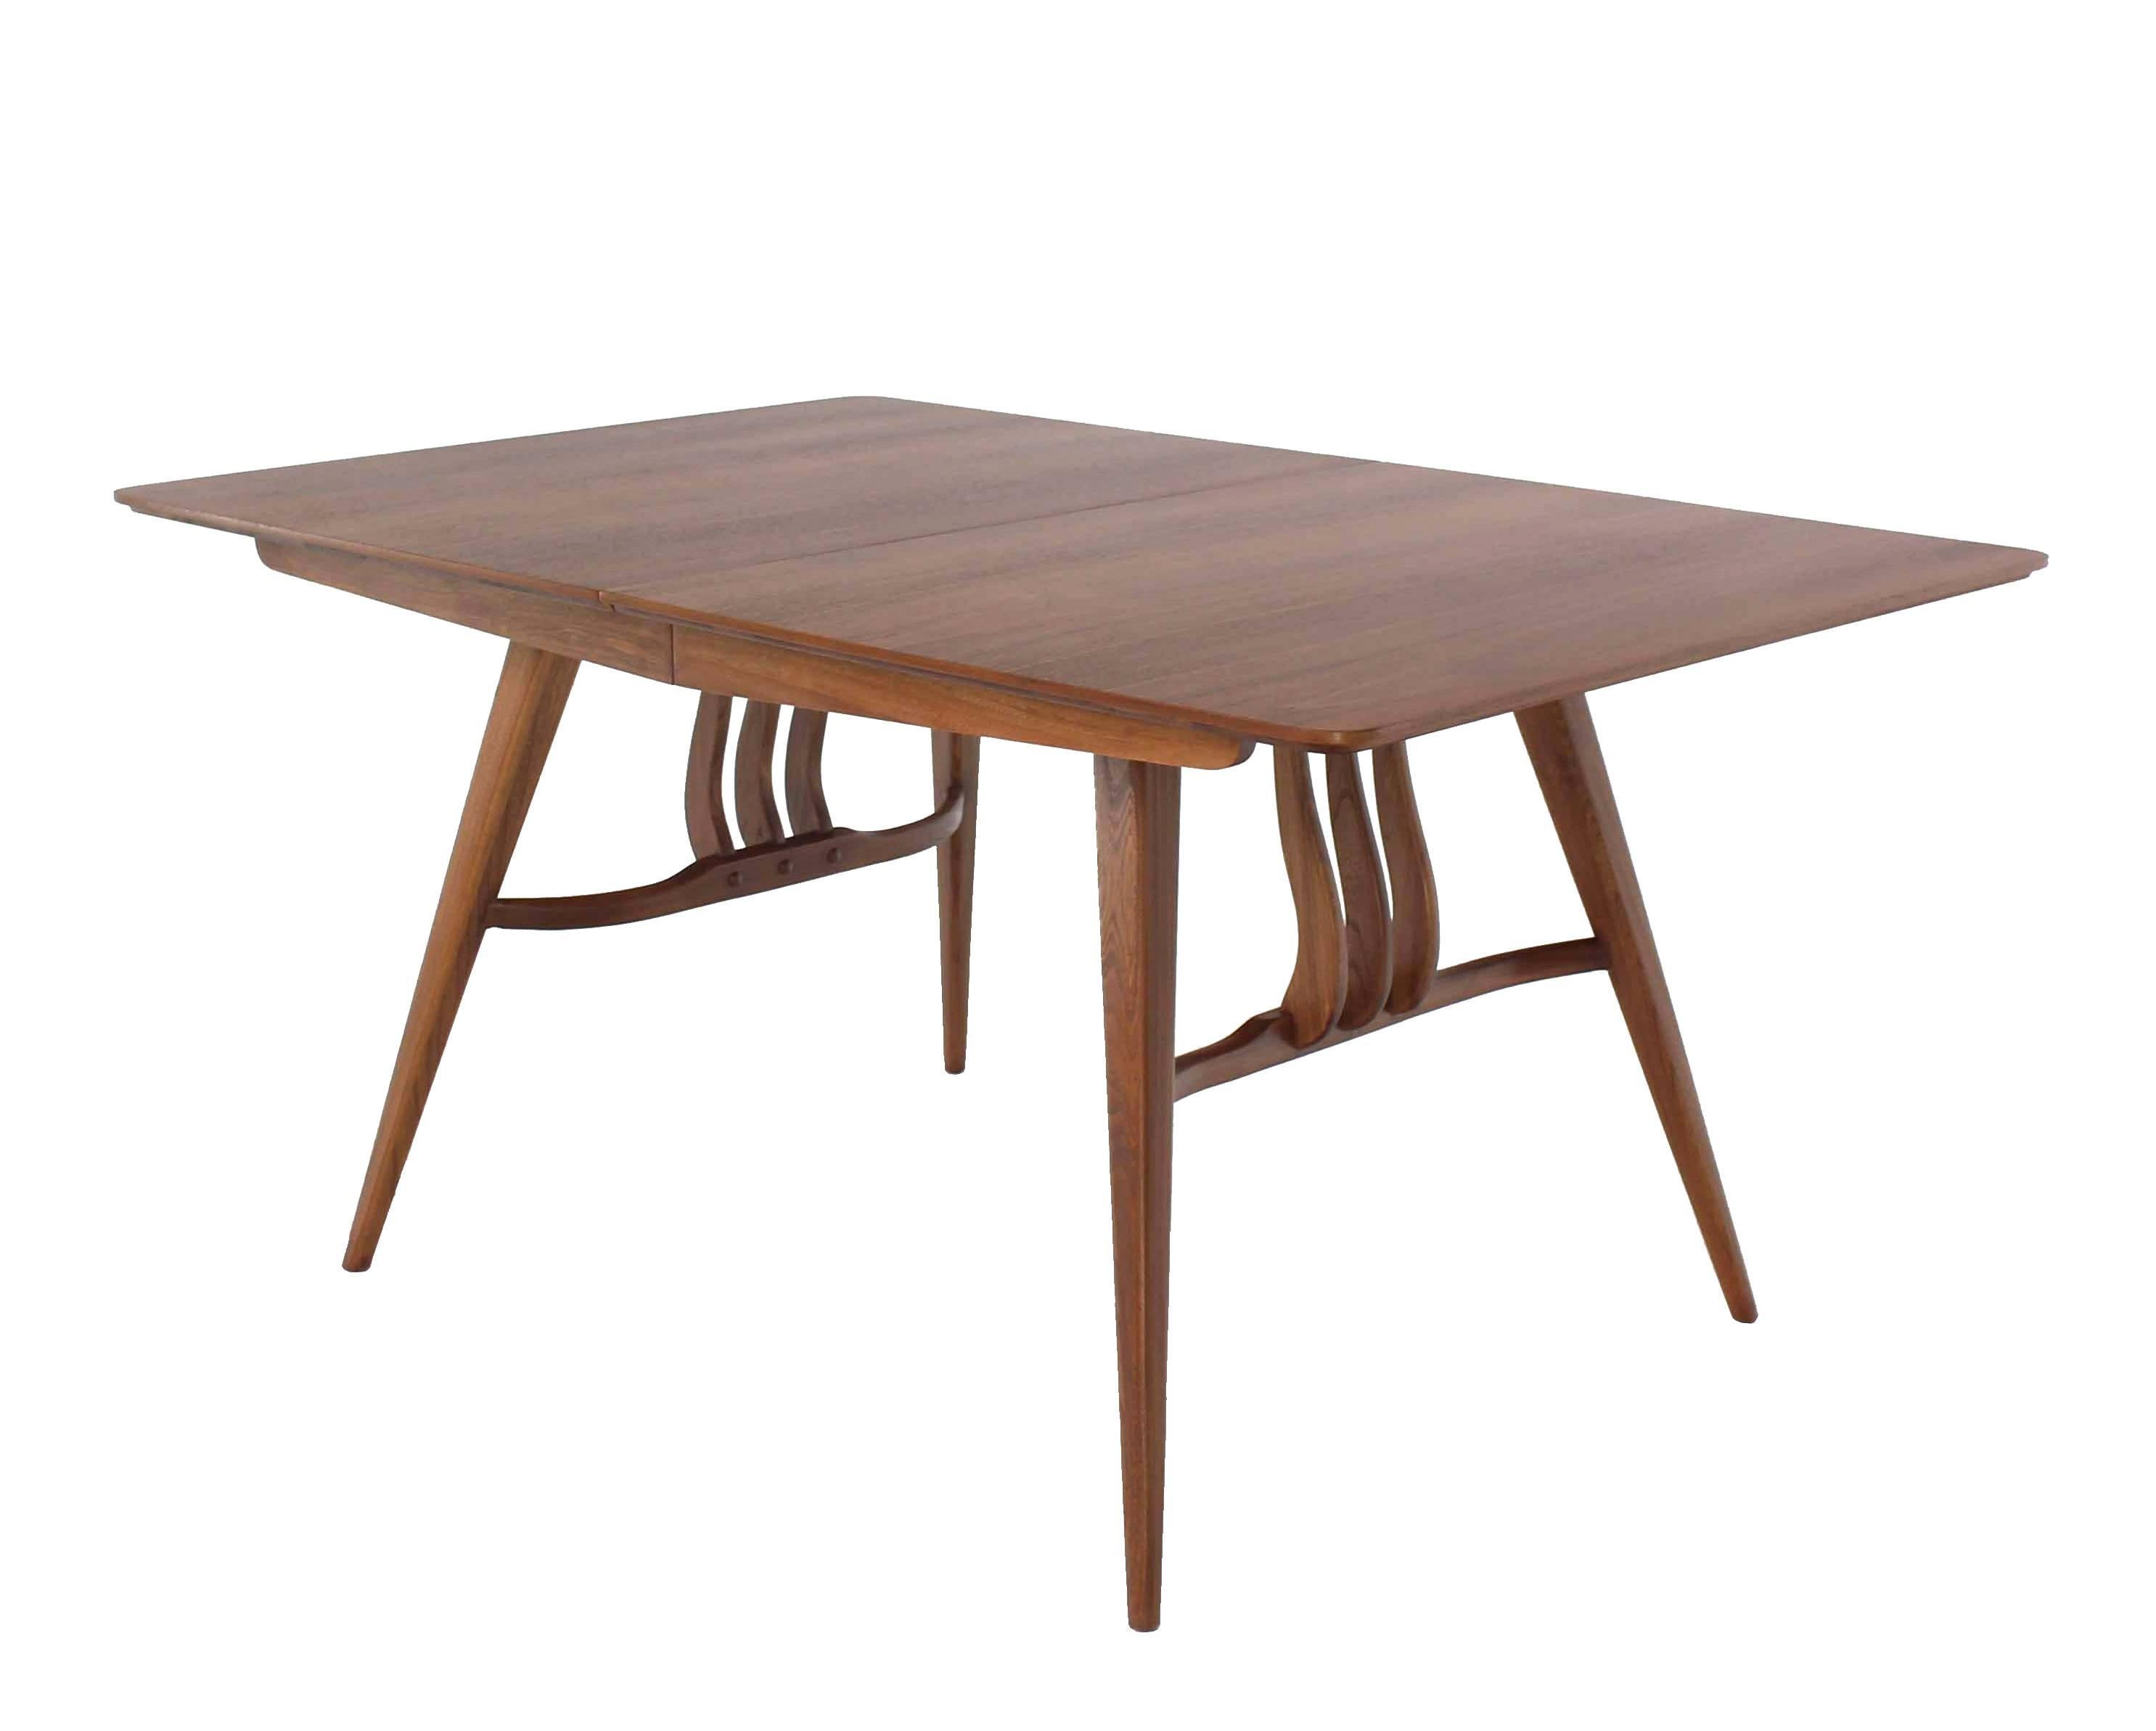 20th Century Mid-Century Modern Walnut Sculptured Base Dining Table For Sale